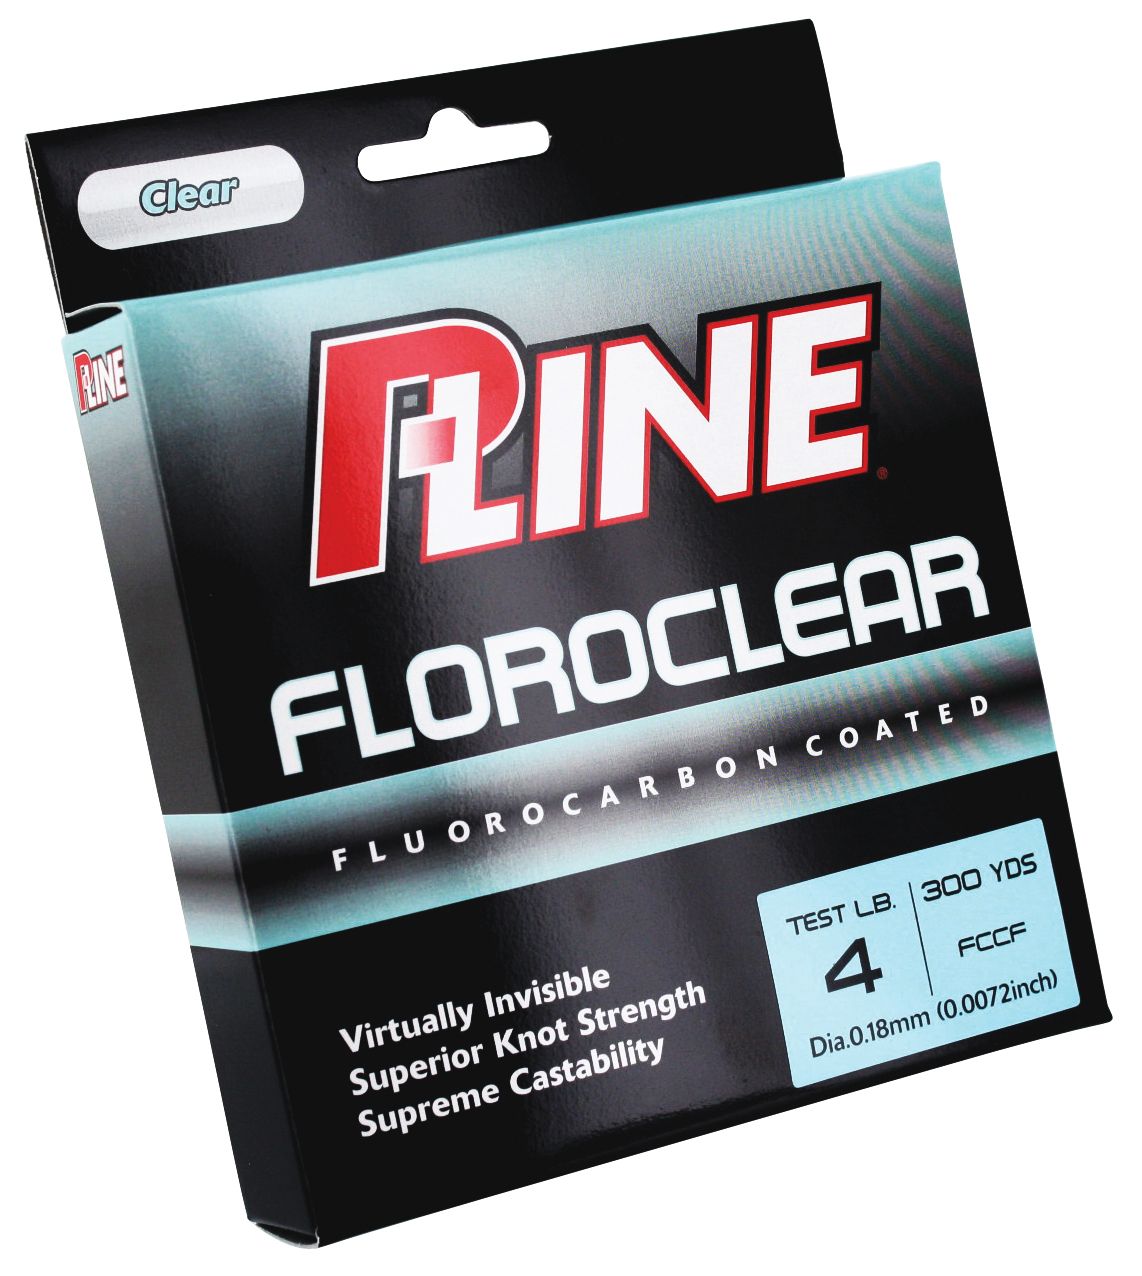 Dick's Sporting Goods P-Line Floroclear Fluorocarbon Coated Fishing Line